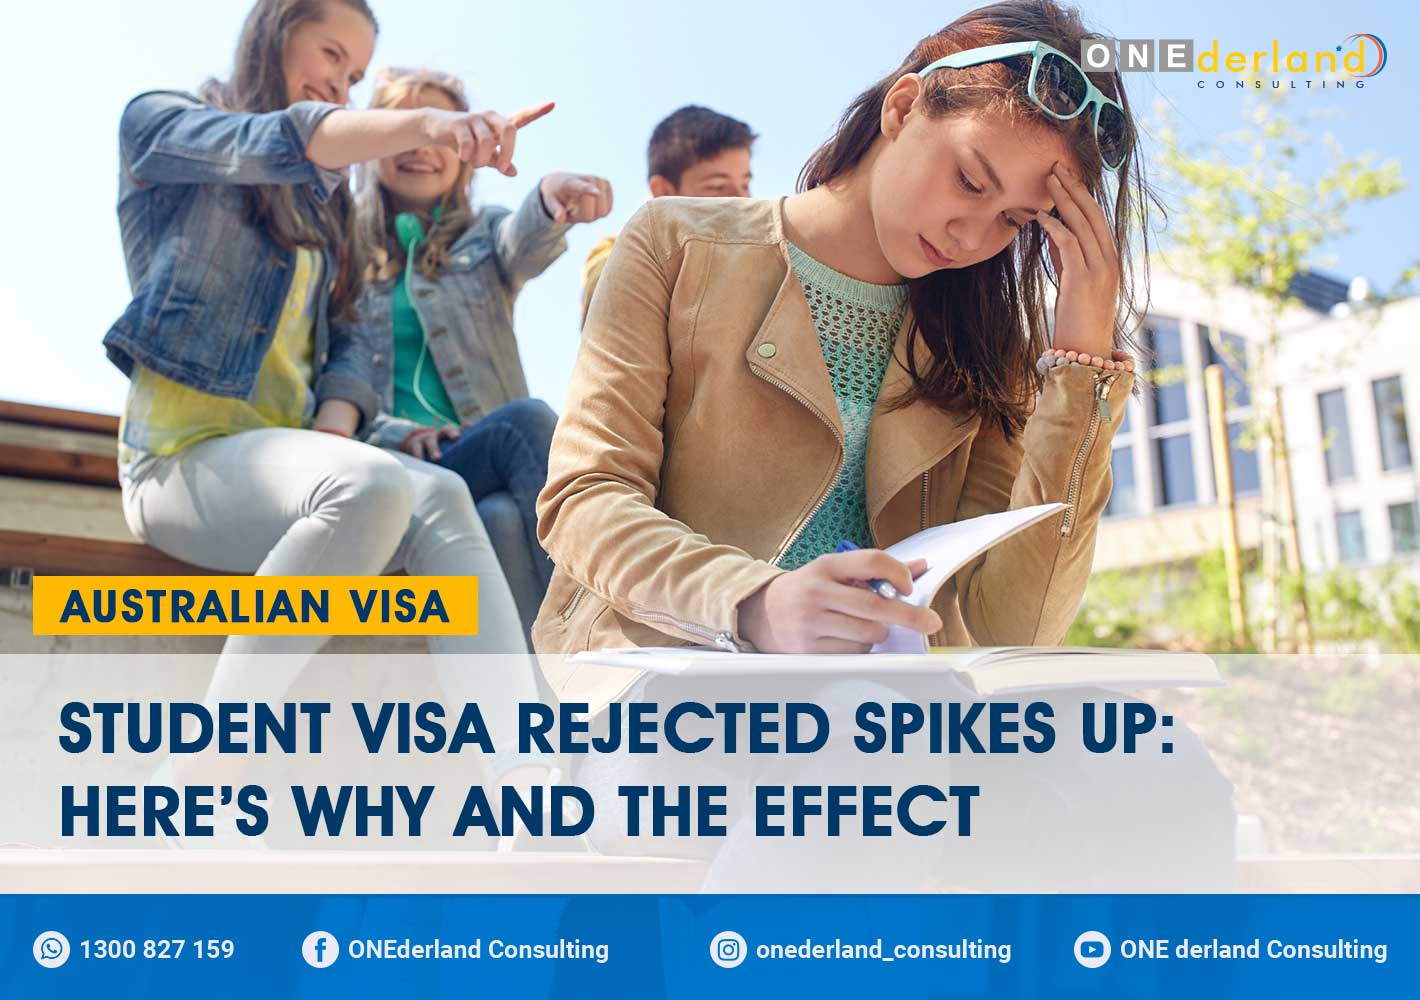 Student-Visa-Rejected-Spikes-Up-Heres-Why-and-the-Effect